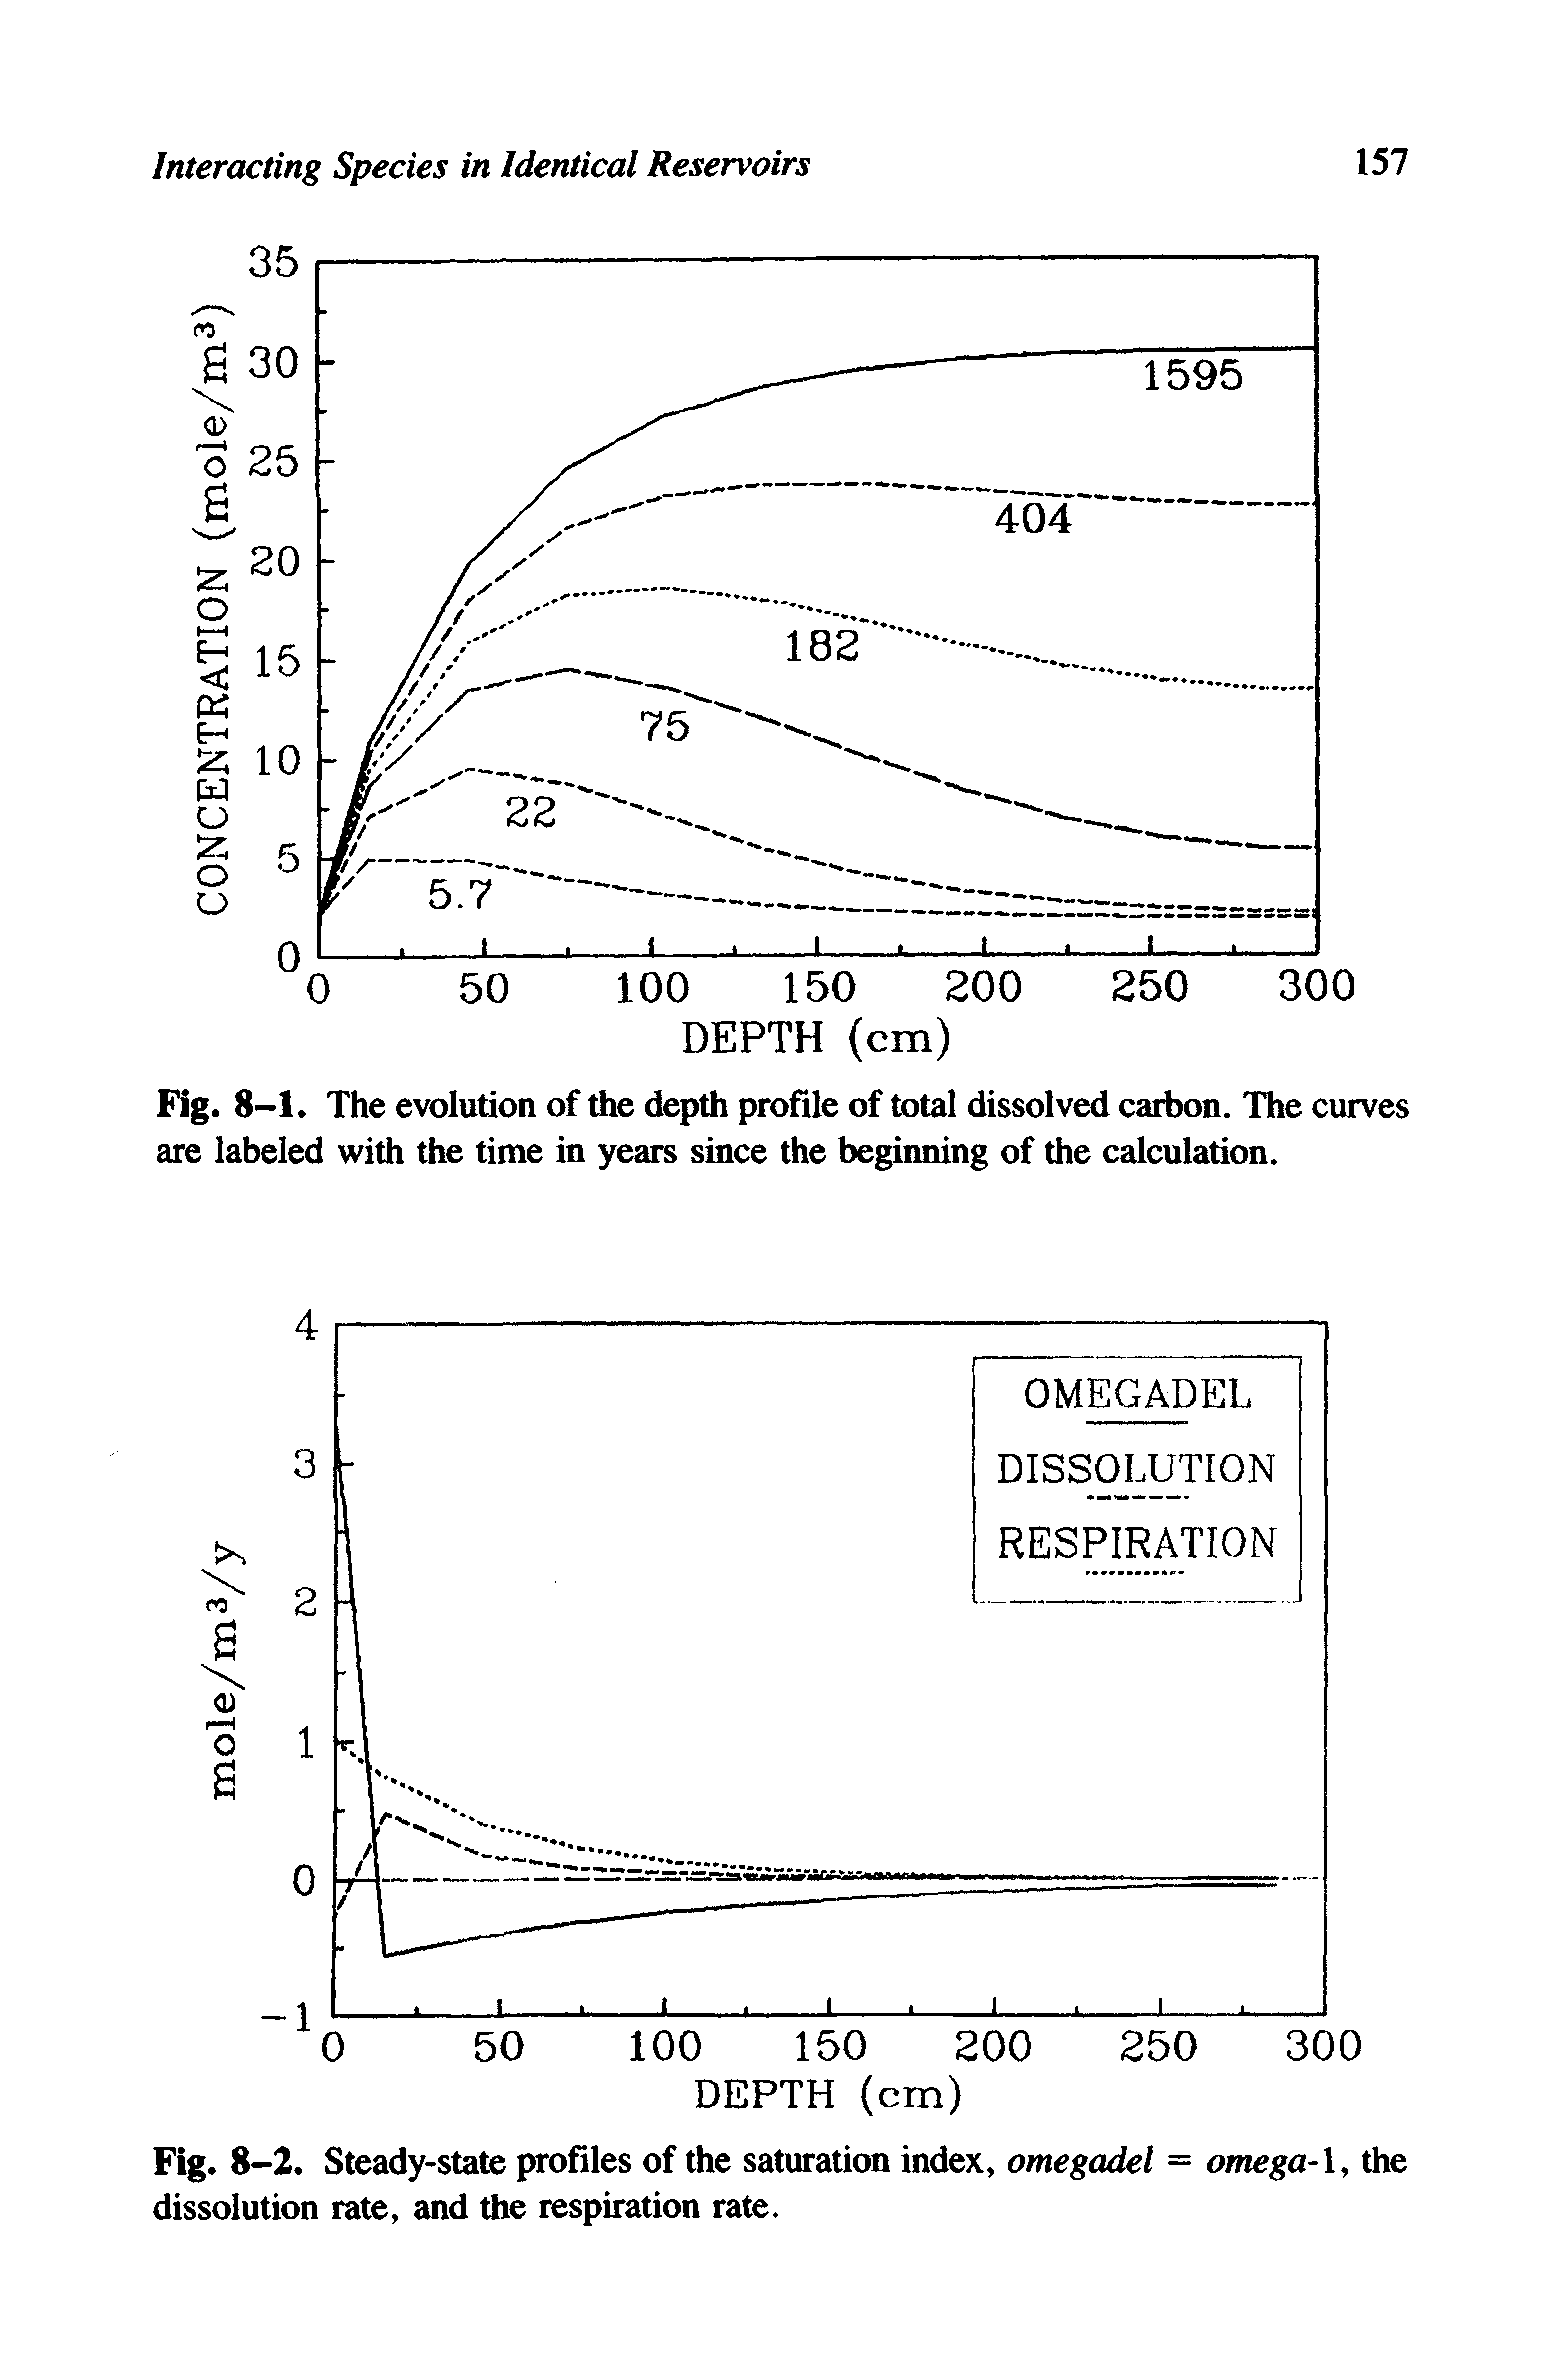 Fig. 8-2. Steady-state profiles of the saturation index, omegadel = omega-1, the dissolution rate, and the respiration rate.